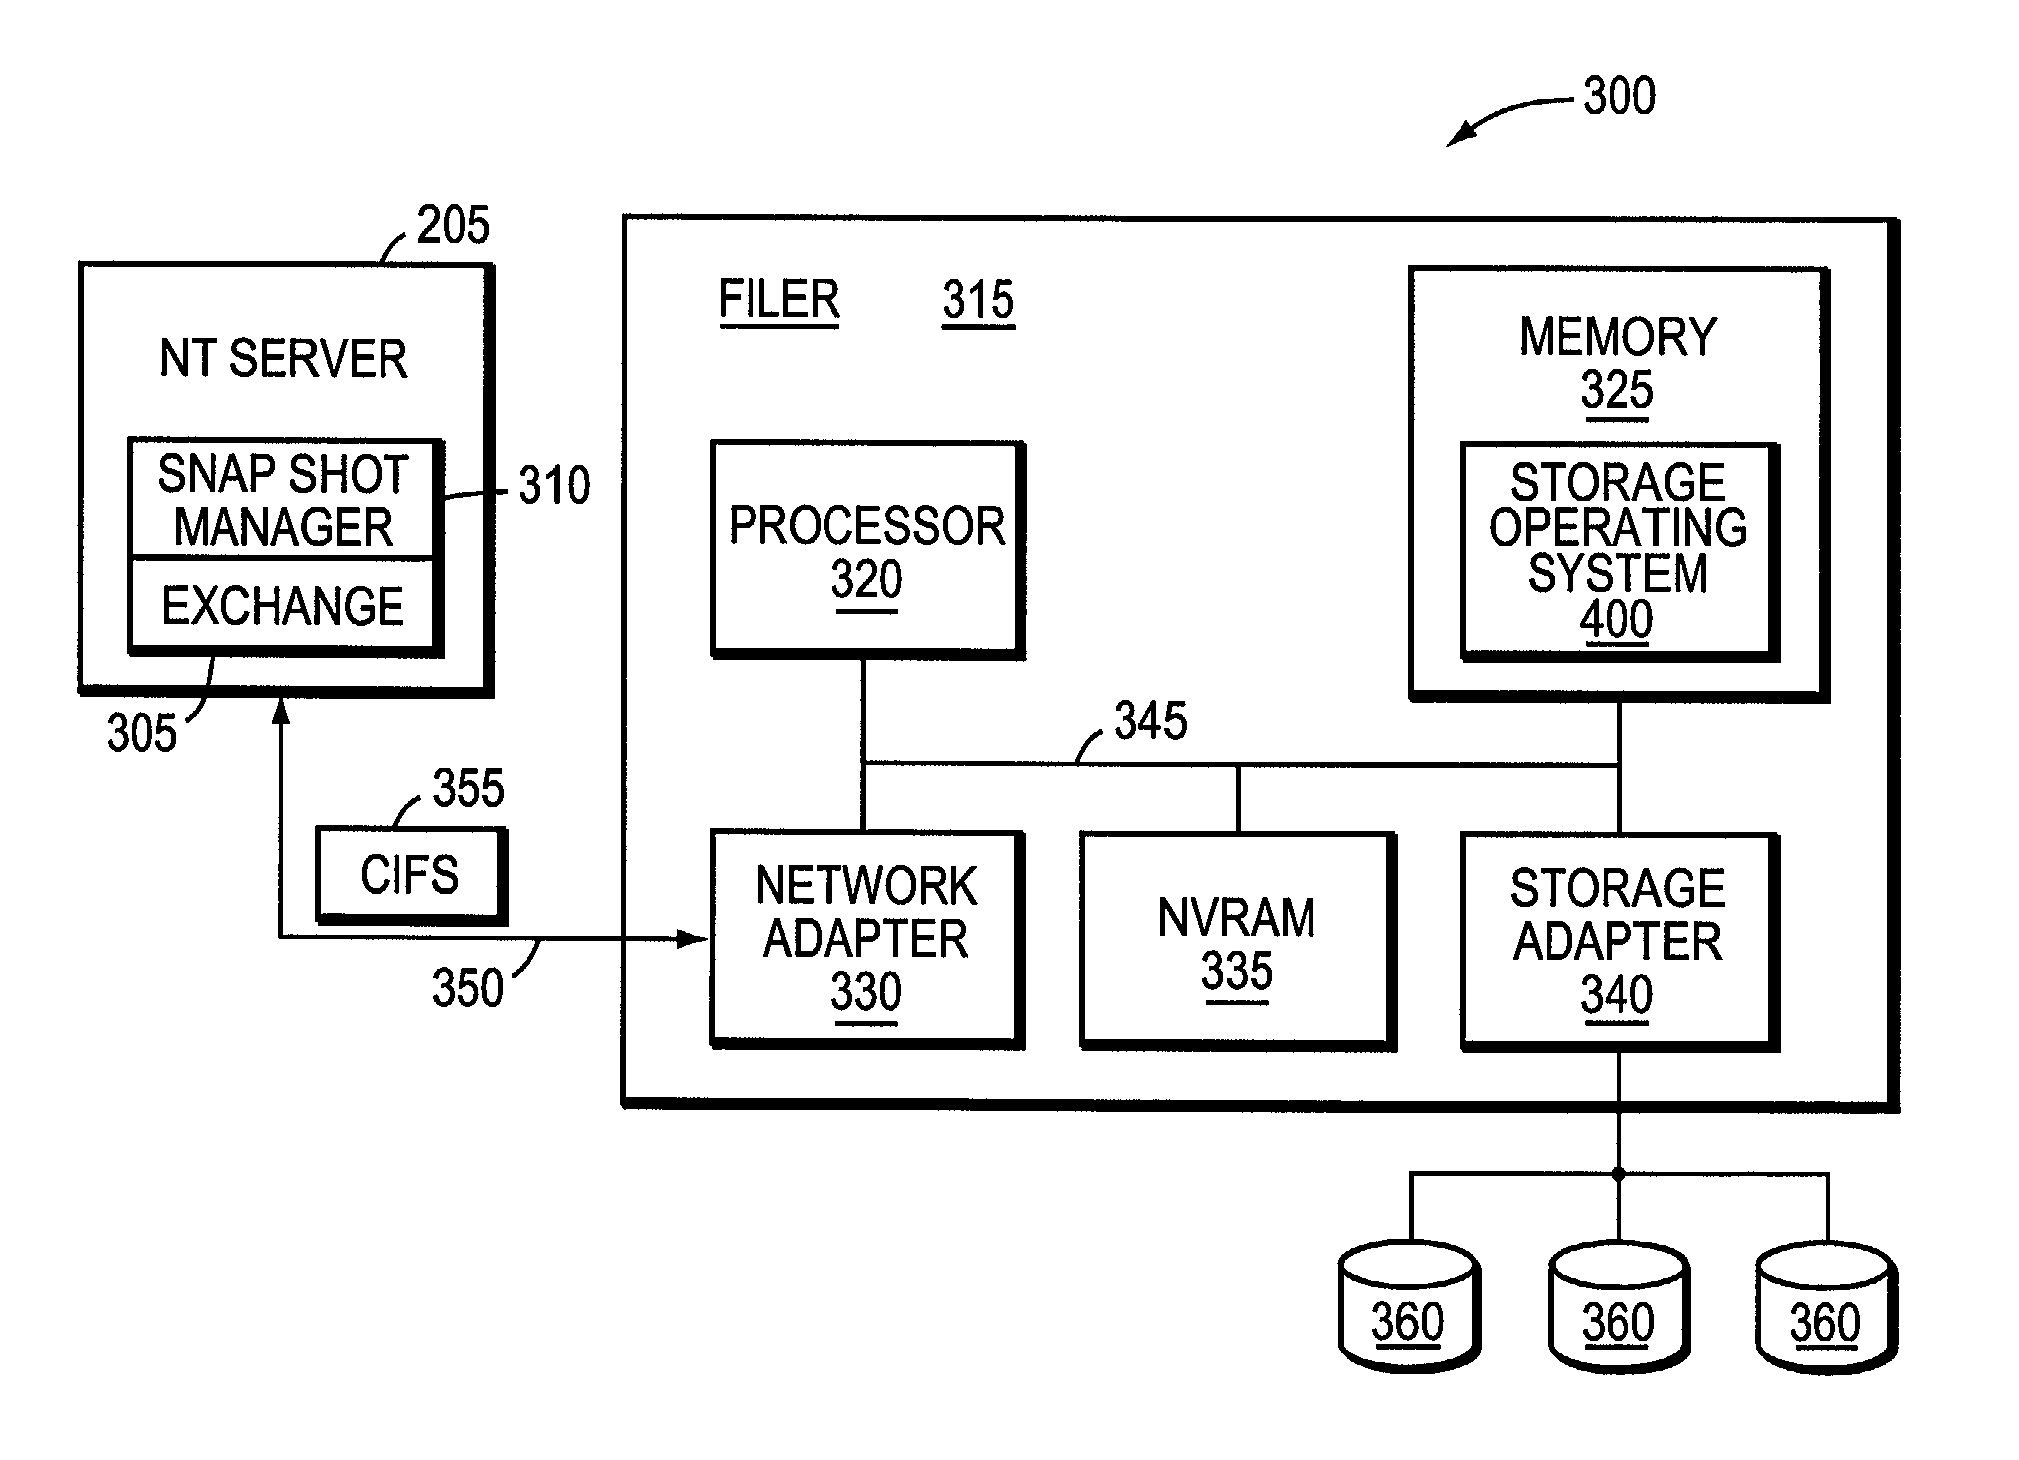 System and method for creating a point-in-time restoration of a database file